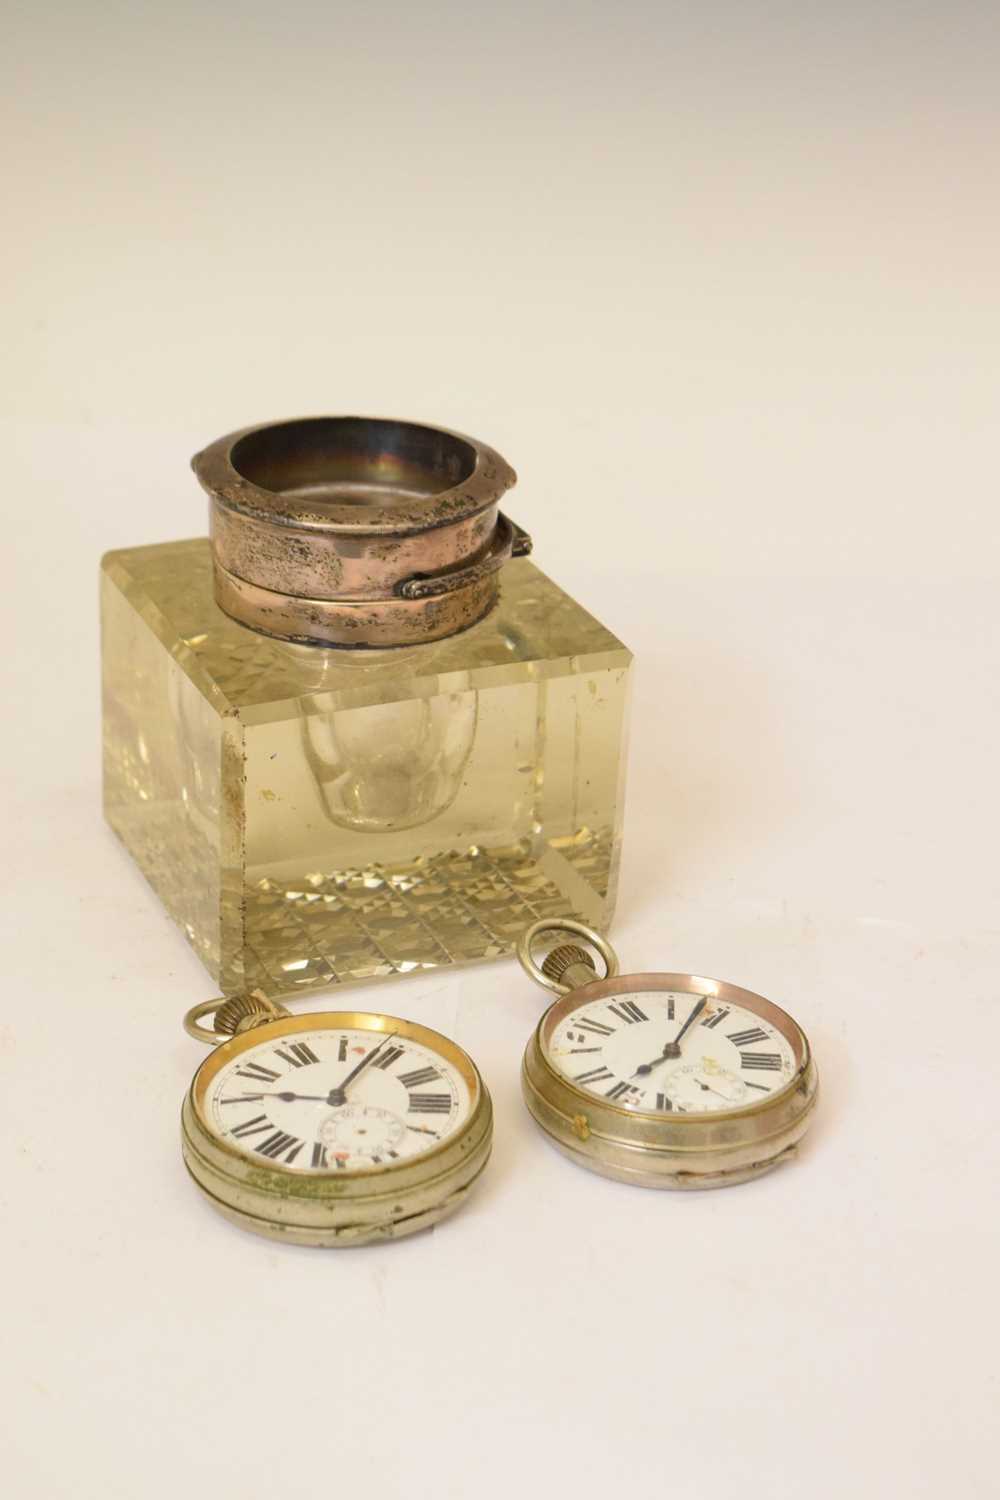 Edwardian silver mounted glass inkwell, and two 'Goliath' style pocket watches - Image 2 of 11